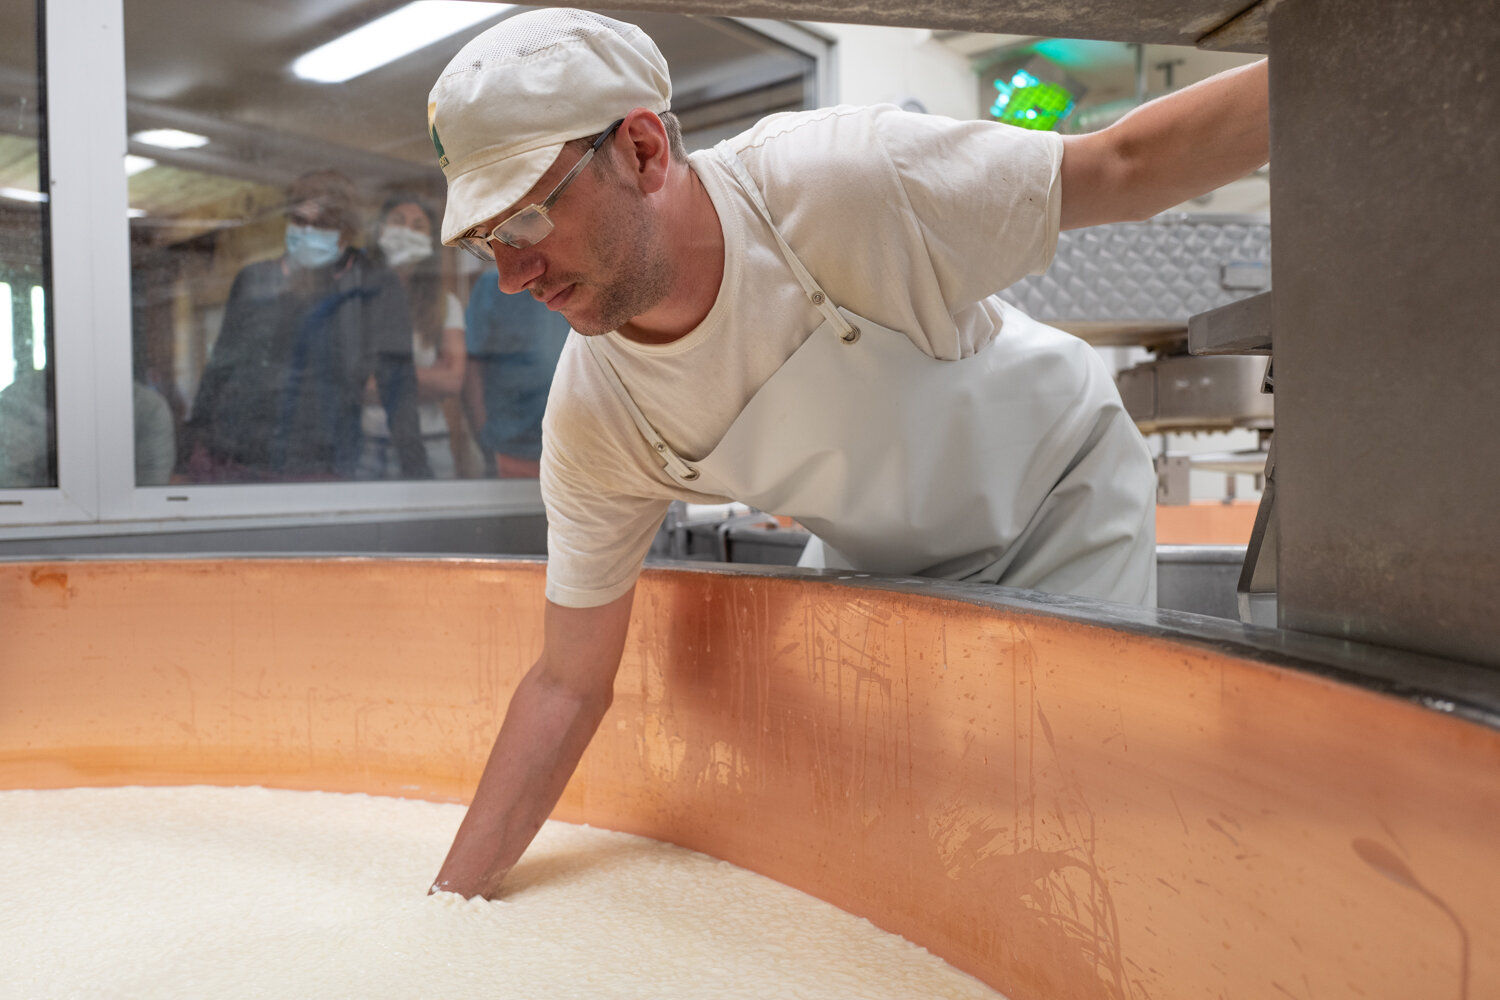  An attention of every moment: the transformation process requests the experience and strong focus of the Maïtre-Fromager, who spends his morning with precise gestures and deep attention. No break is possible before the new cheese is under the press.